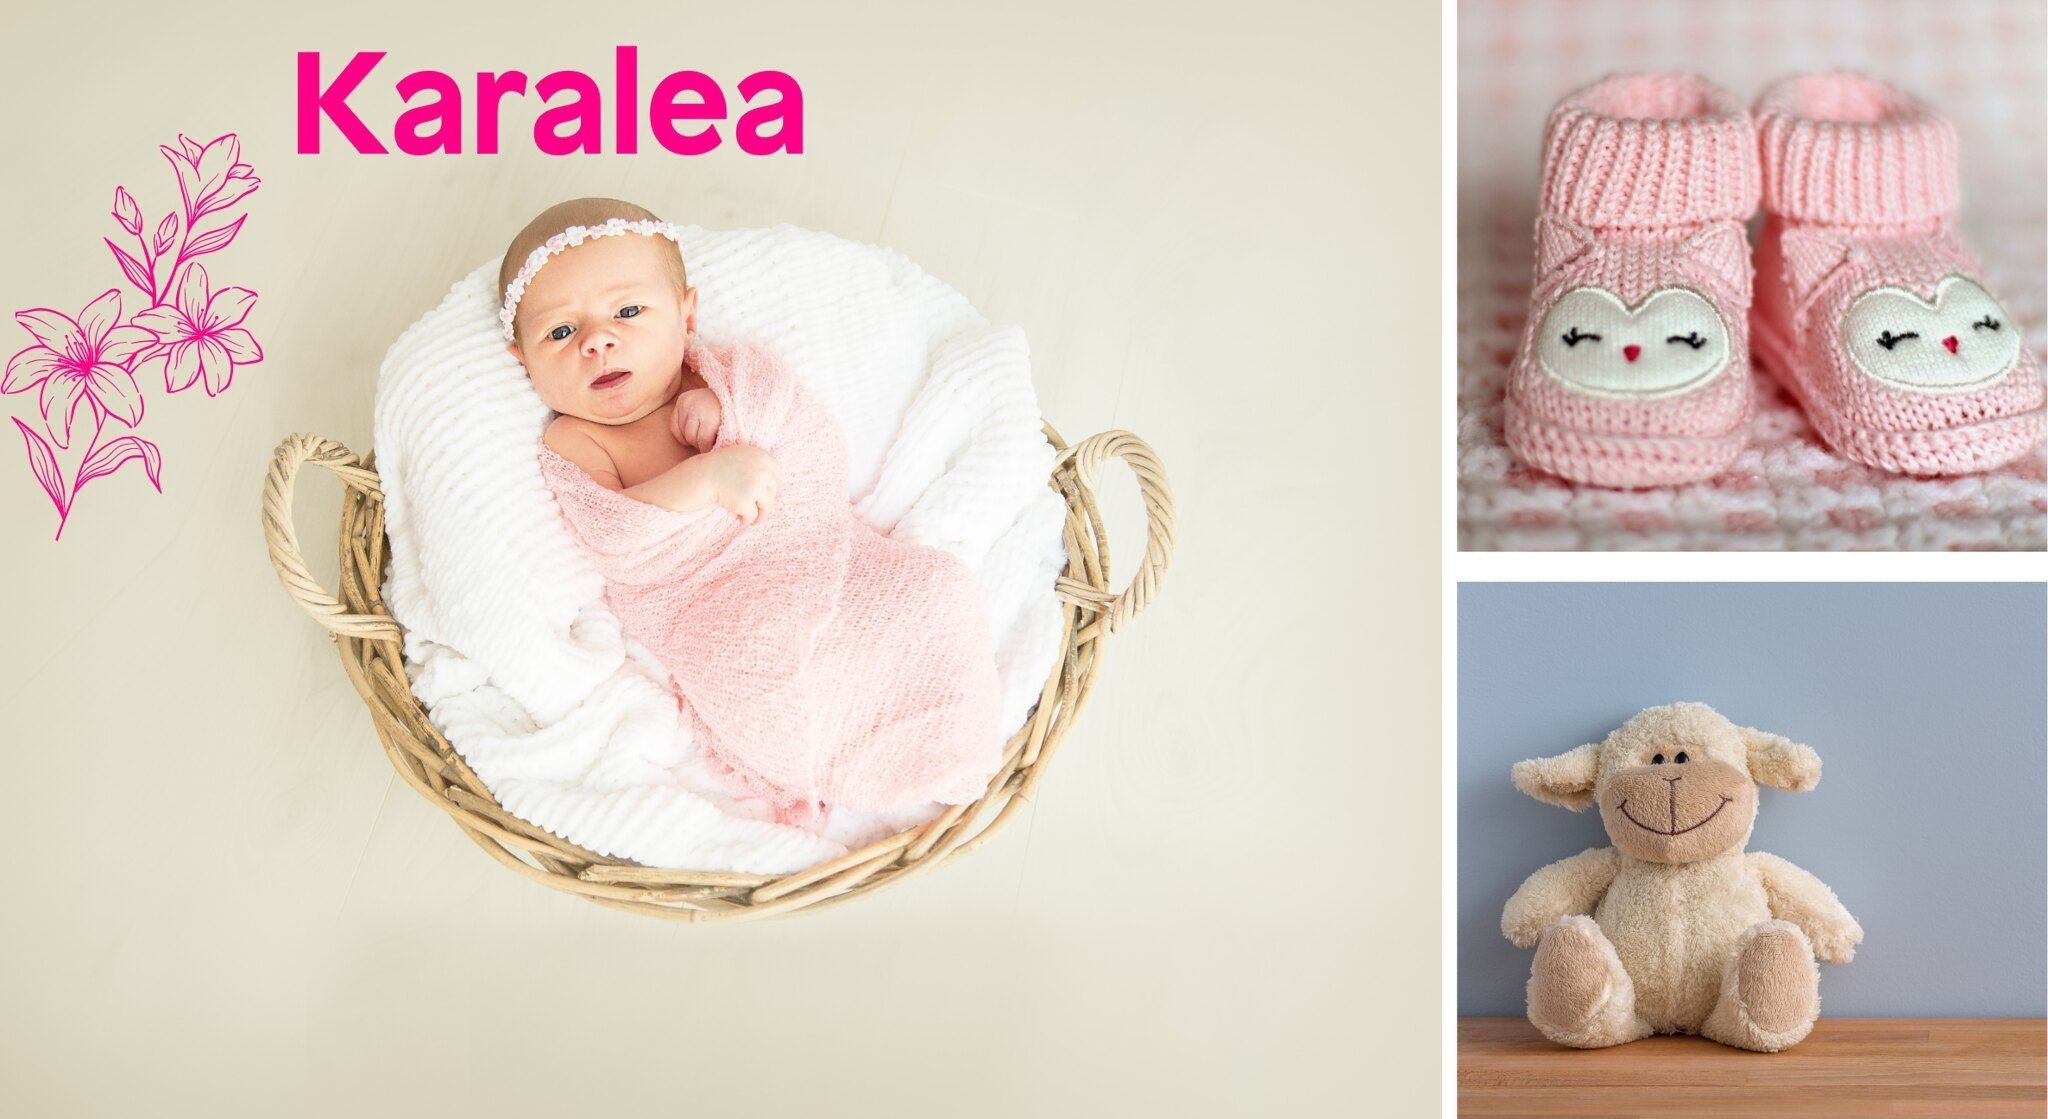 Meaning of the name Karalea